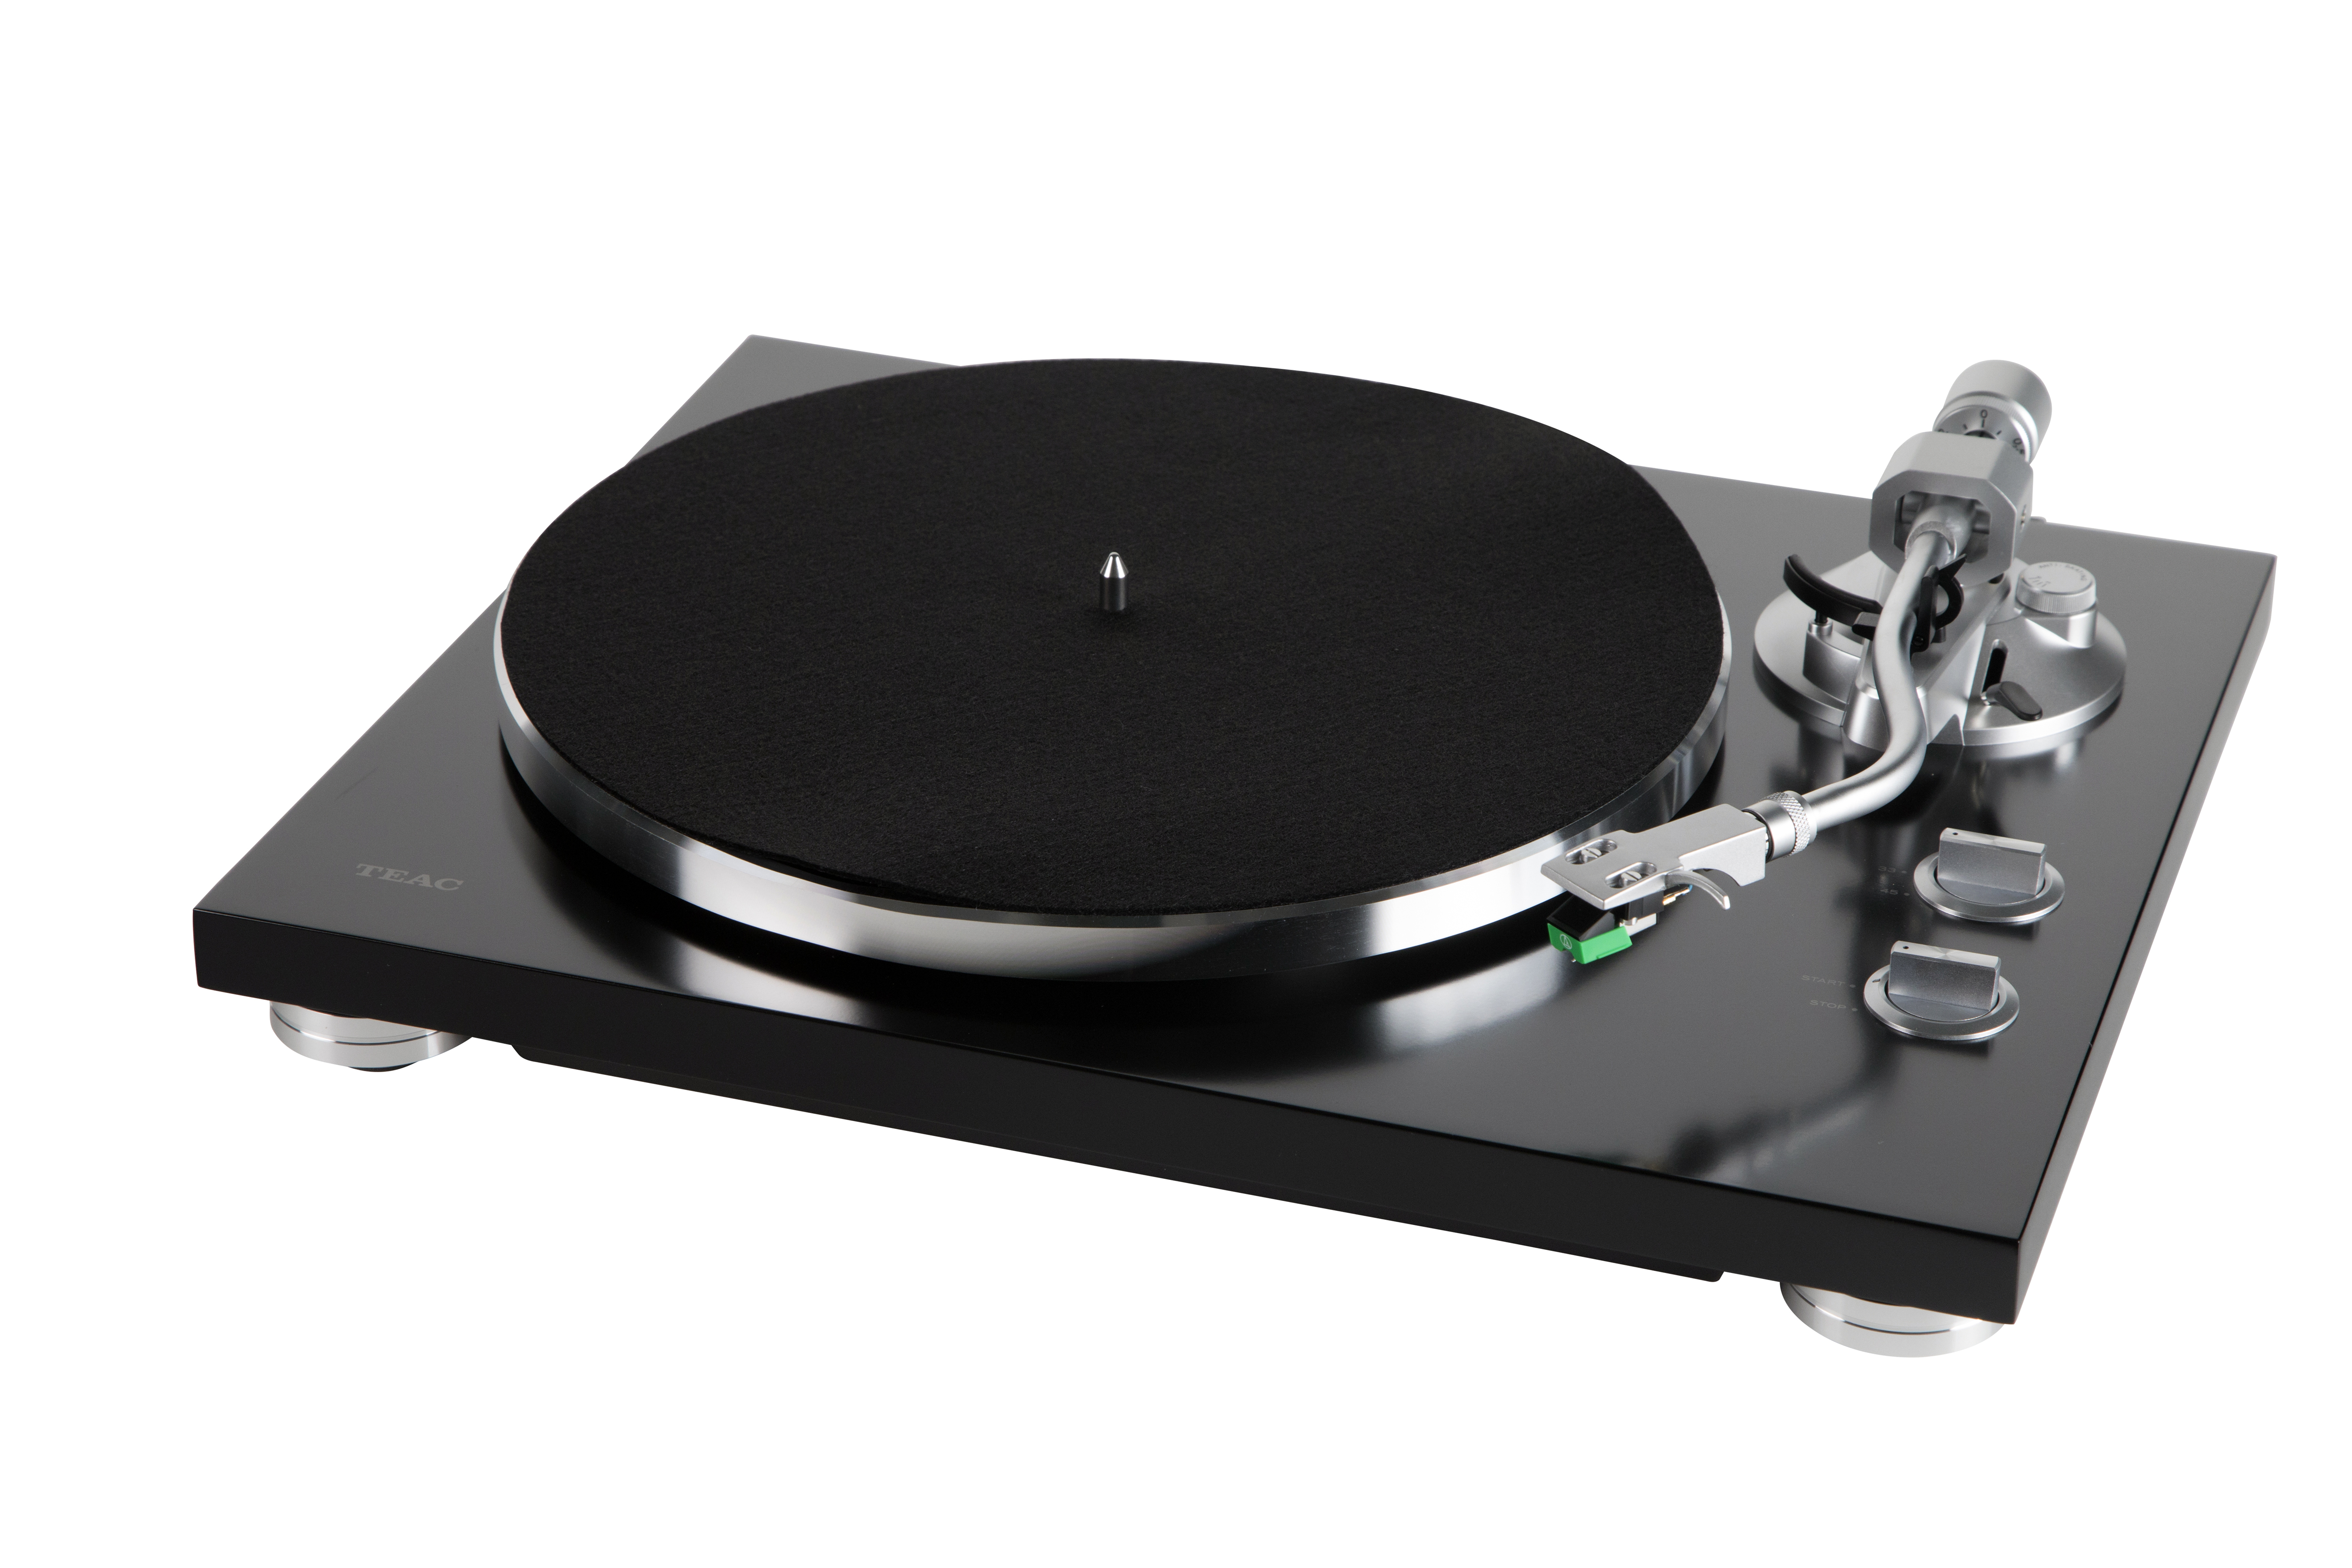 Review: Teac TN-350 | Usable, All Round Turntable